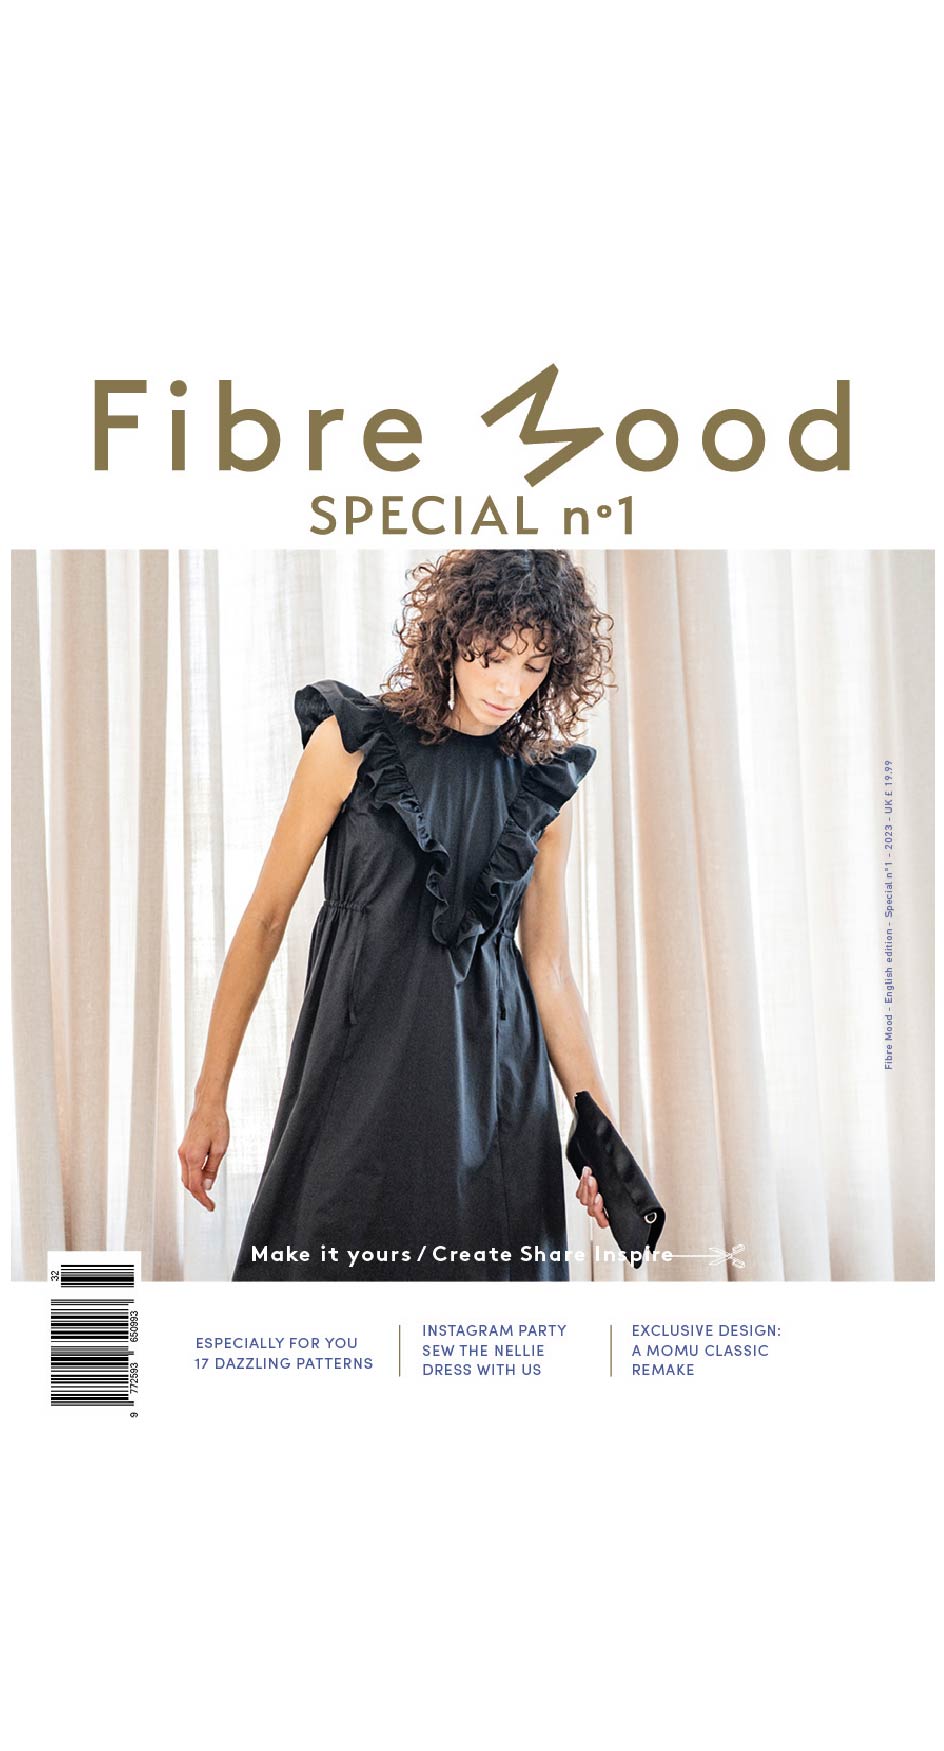 A sewing pattern magazine from Fibre Mood on The Fold Line. A magazine with 17 patterns including a jumpsuit, waistcoat, tops, trousers, jackets, and dresses.